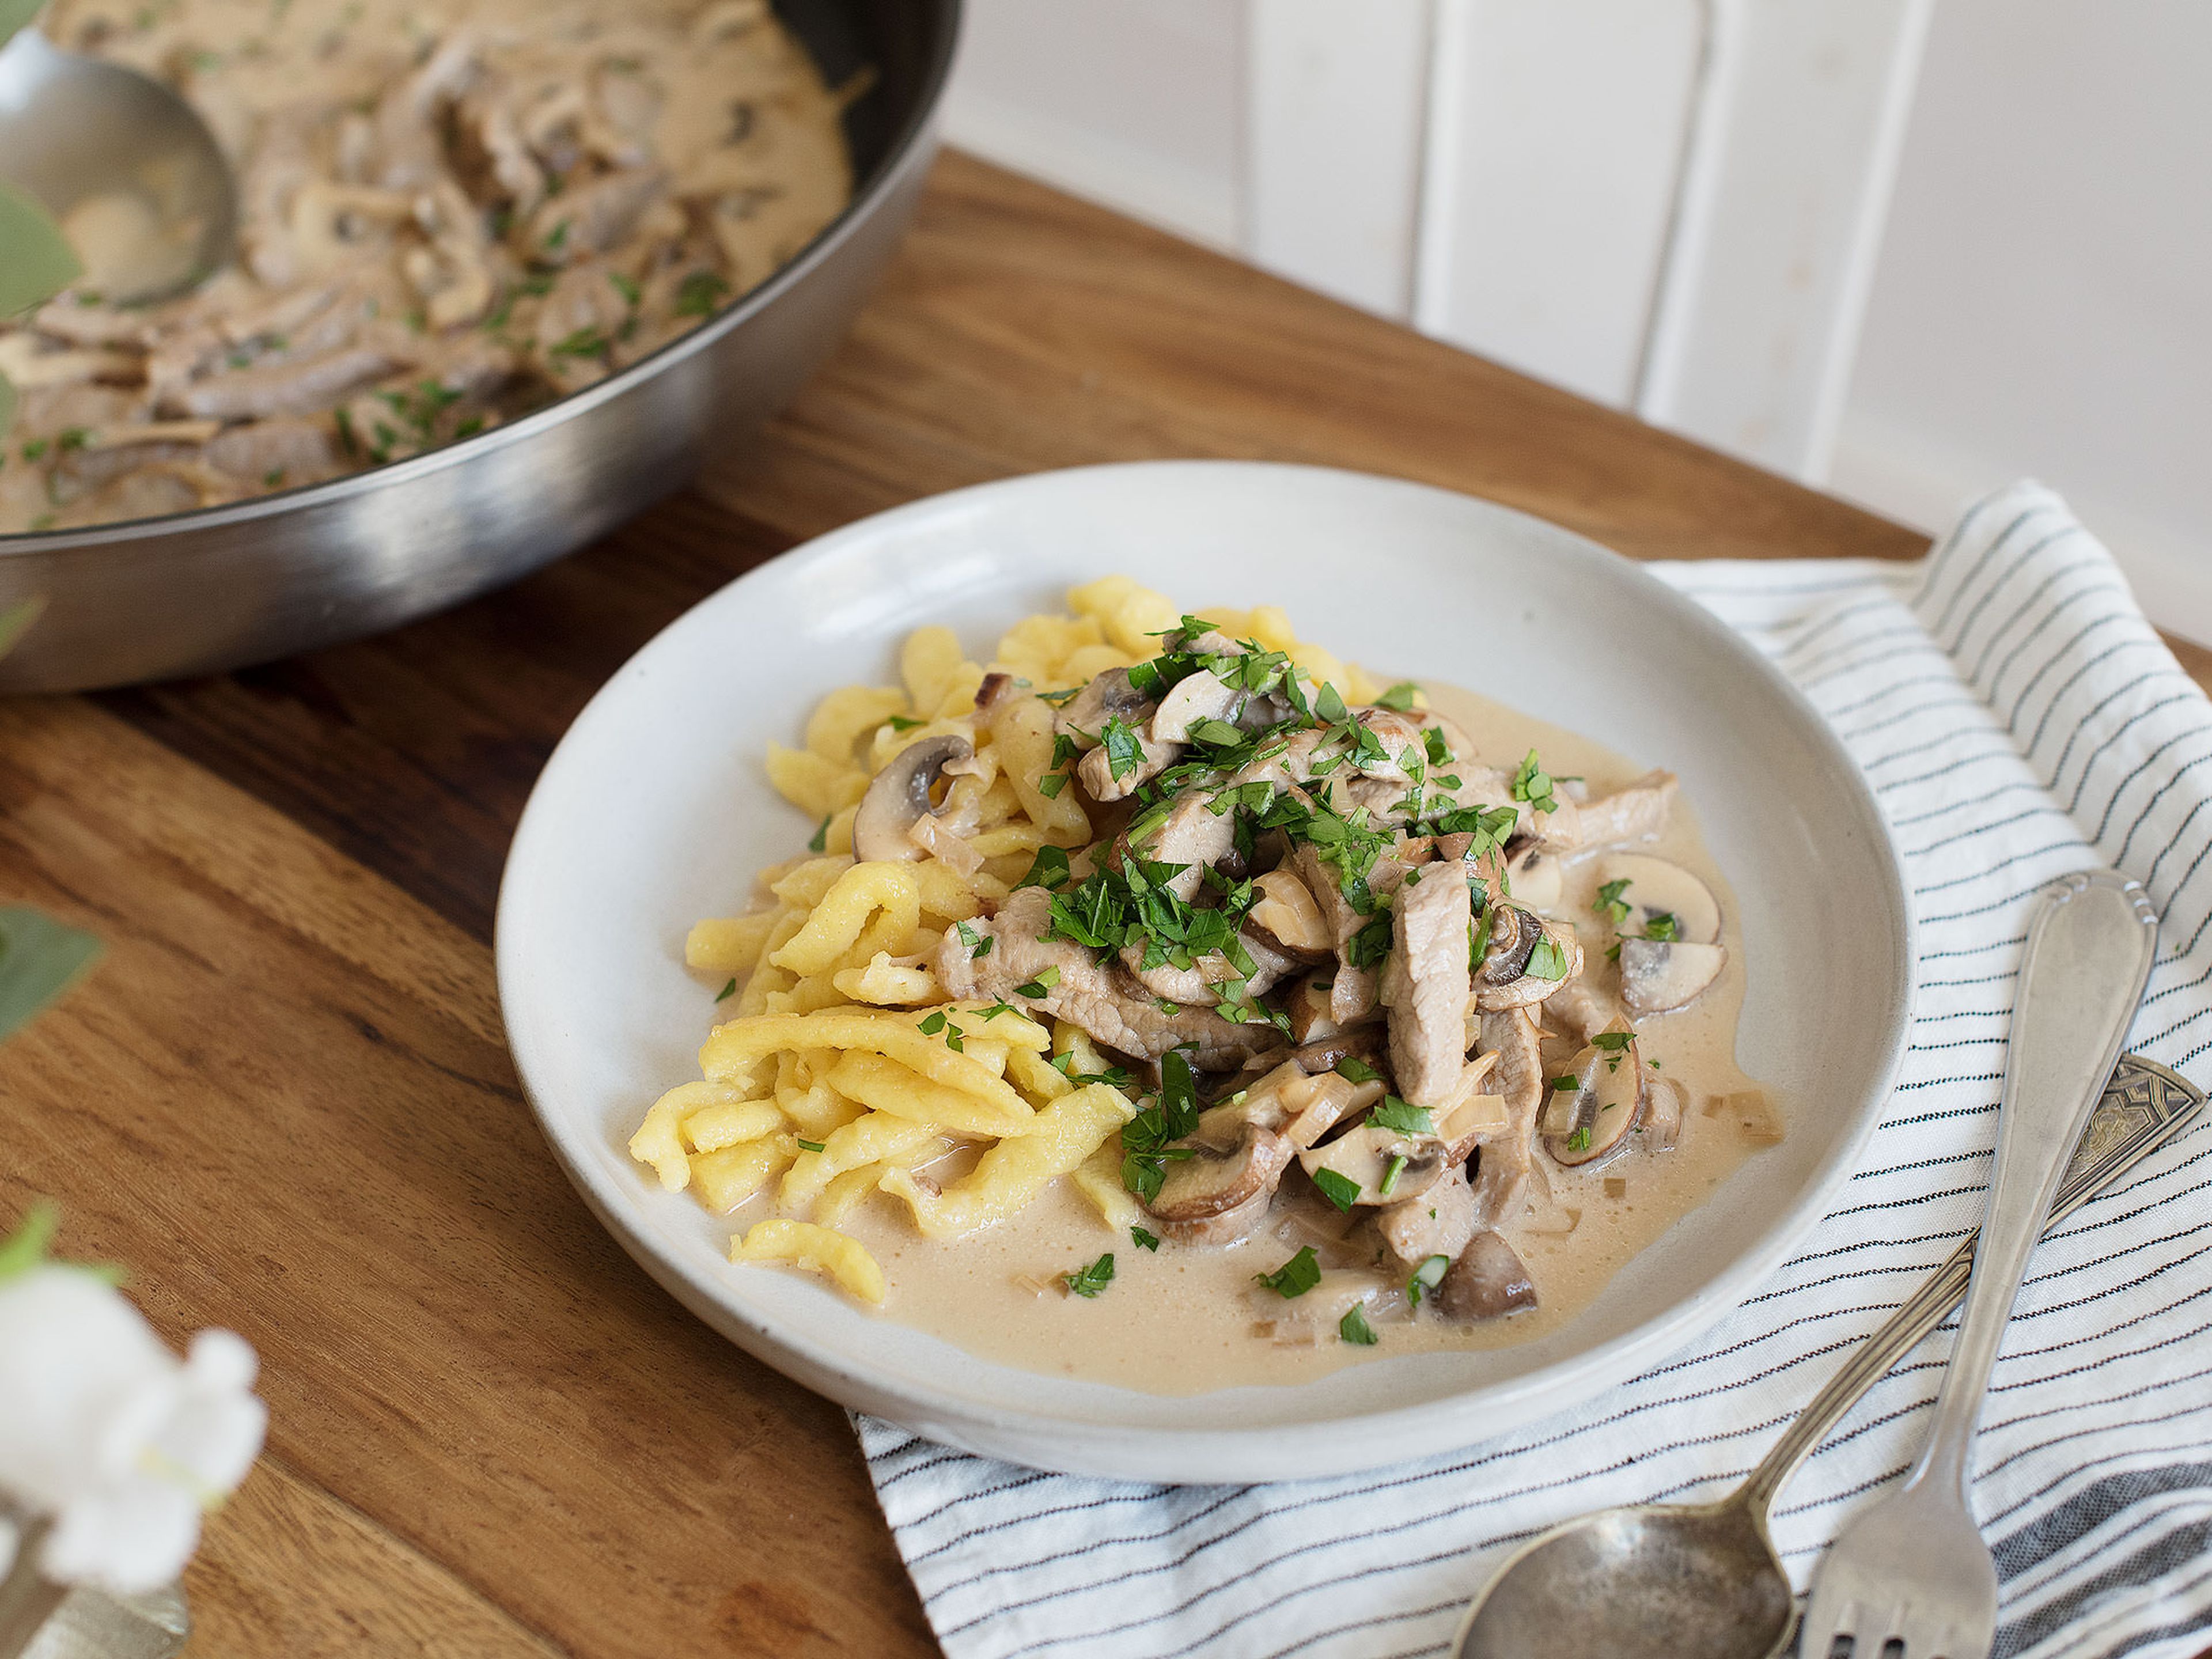 Zurich-style veal and mushroom ragout